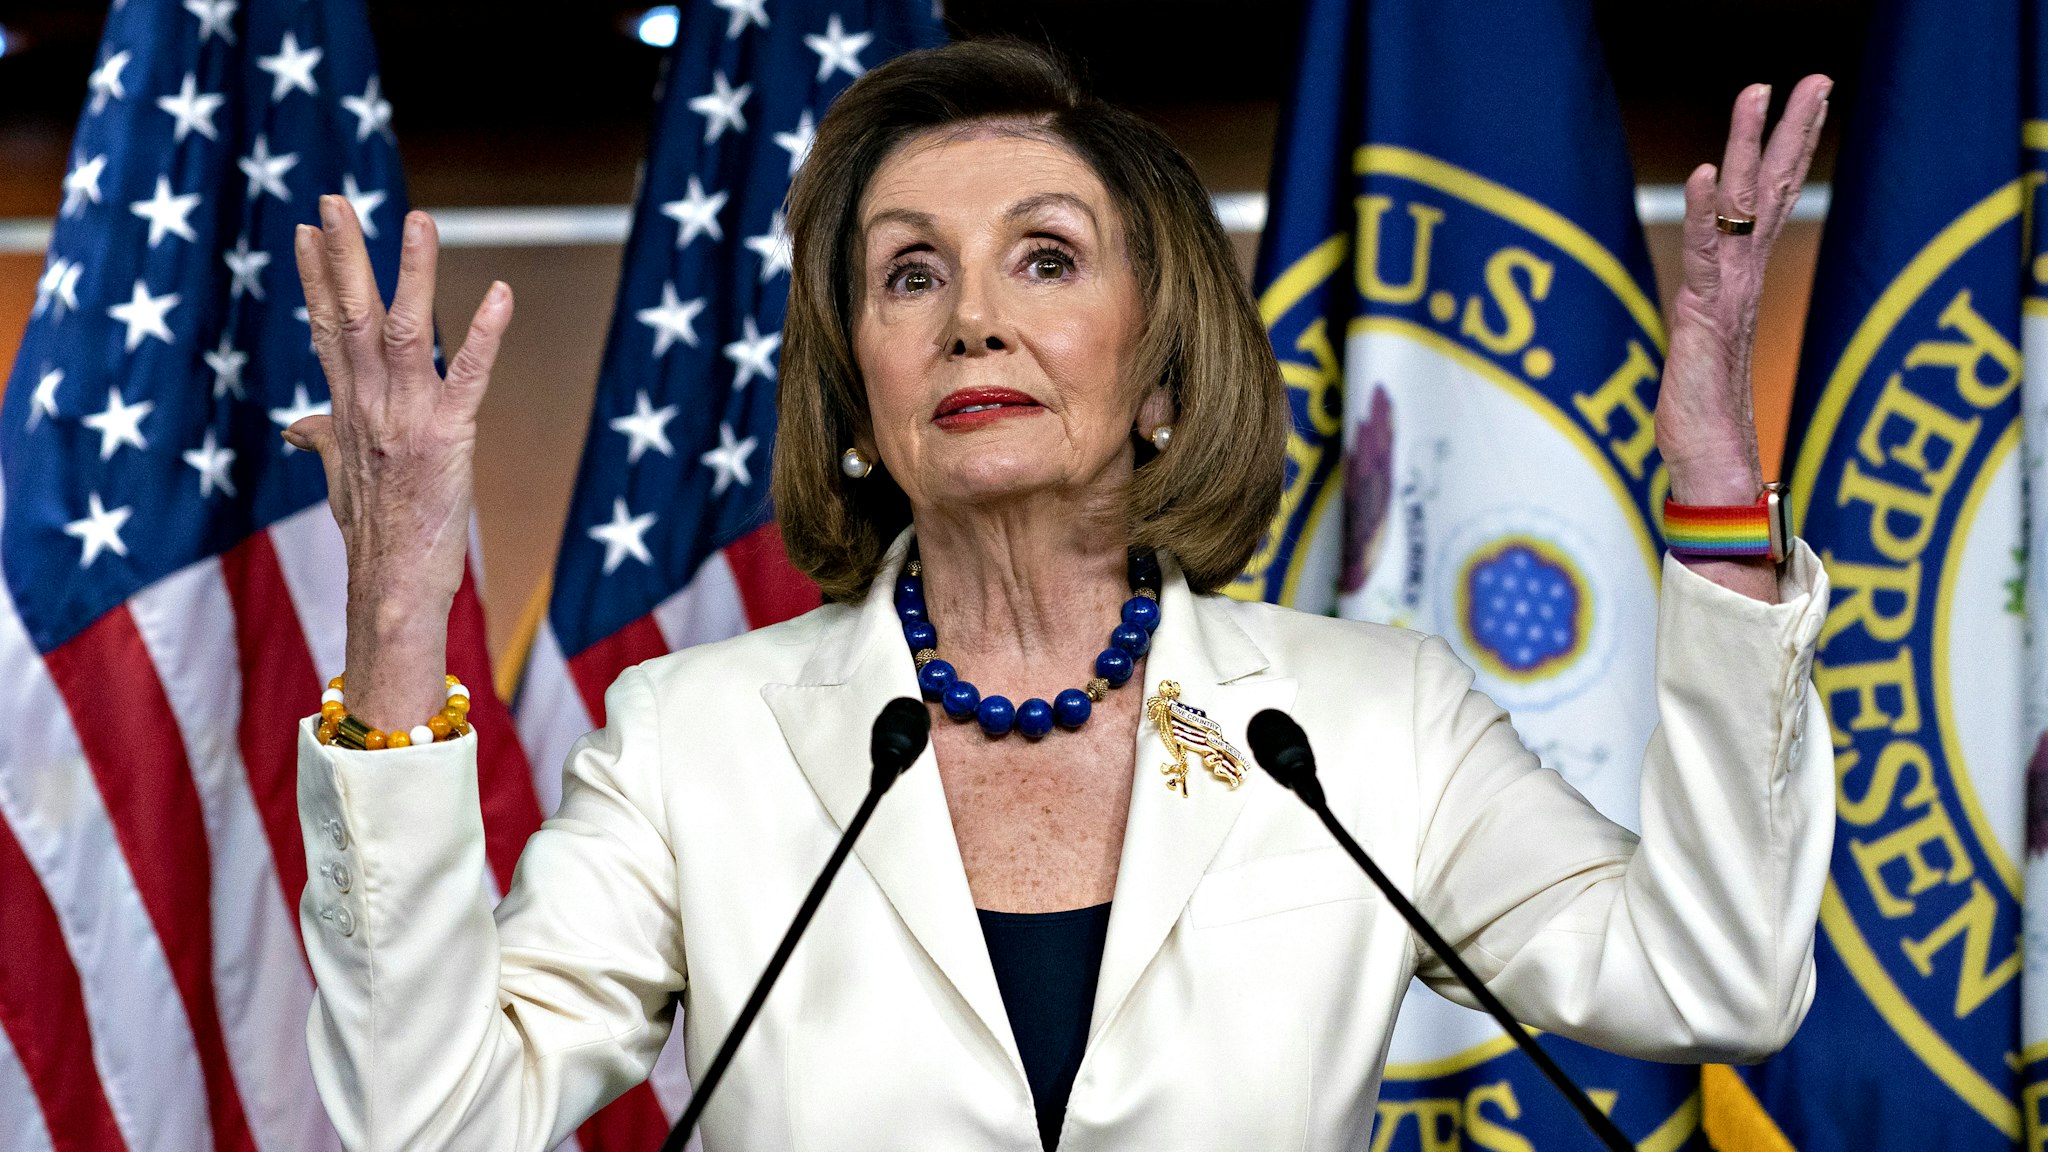 U.S. House Speaker Nancy Pelosi, a Democrat from California, speaks during a news conference on Capitol Hill in Washington, D.C., U.S., on Thursday, Dec. 5, 2019. Pelosi said today that President Donald Trump's actions are a "profound violation of the public trust" and she is asking Representative Jerry Nadler to proceed with drafting articles of impeachment.